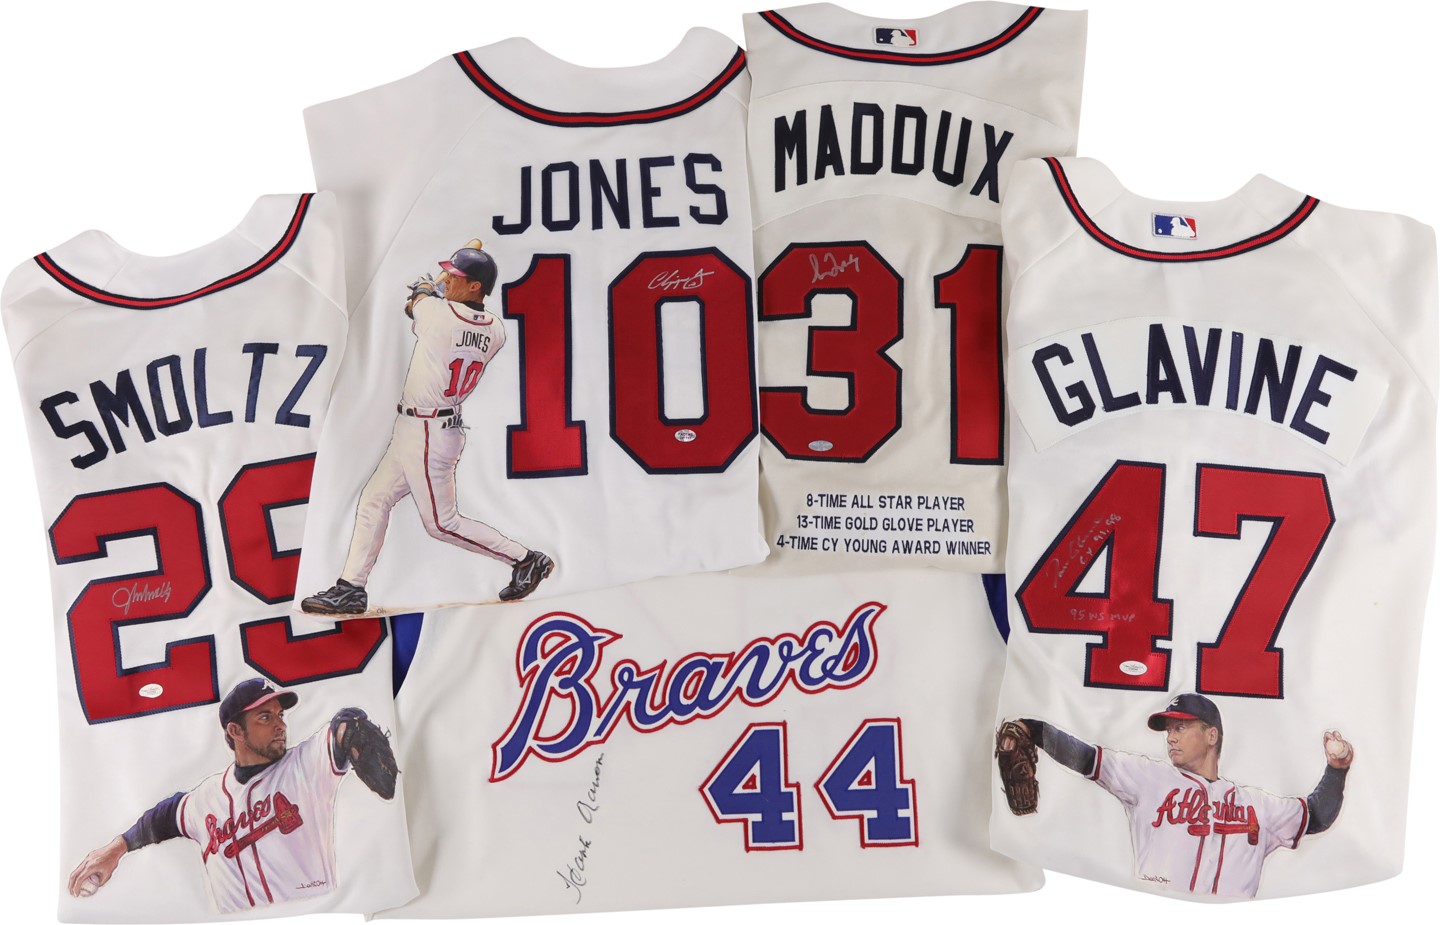 Baseball Autographs - Atlanta Braves Hall of Famers and Stars Signed Jerseys with "1 of 1" Hand Painted Jerseys (11)